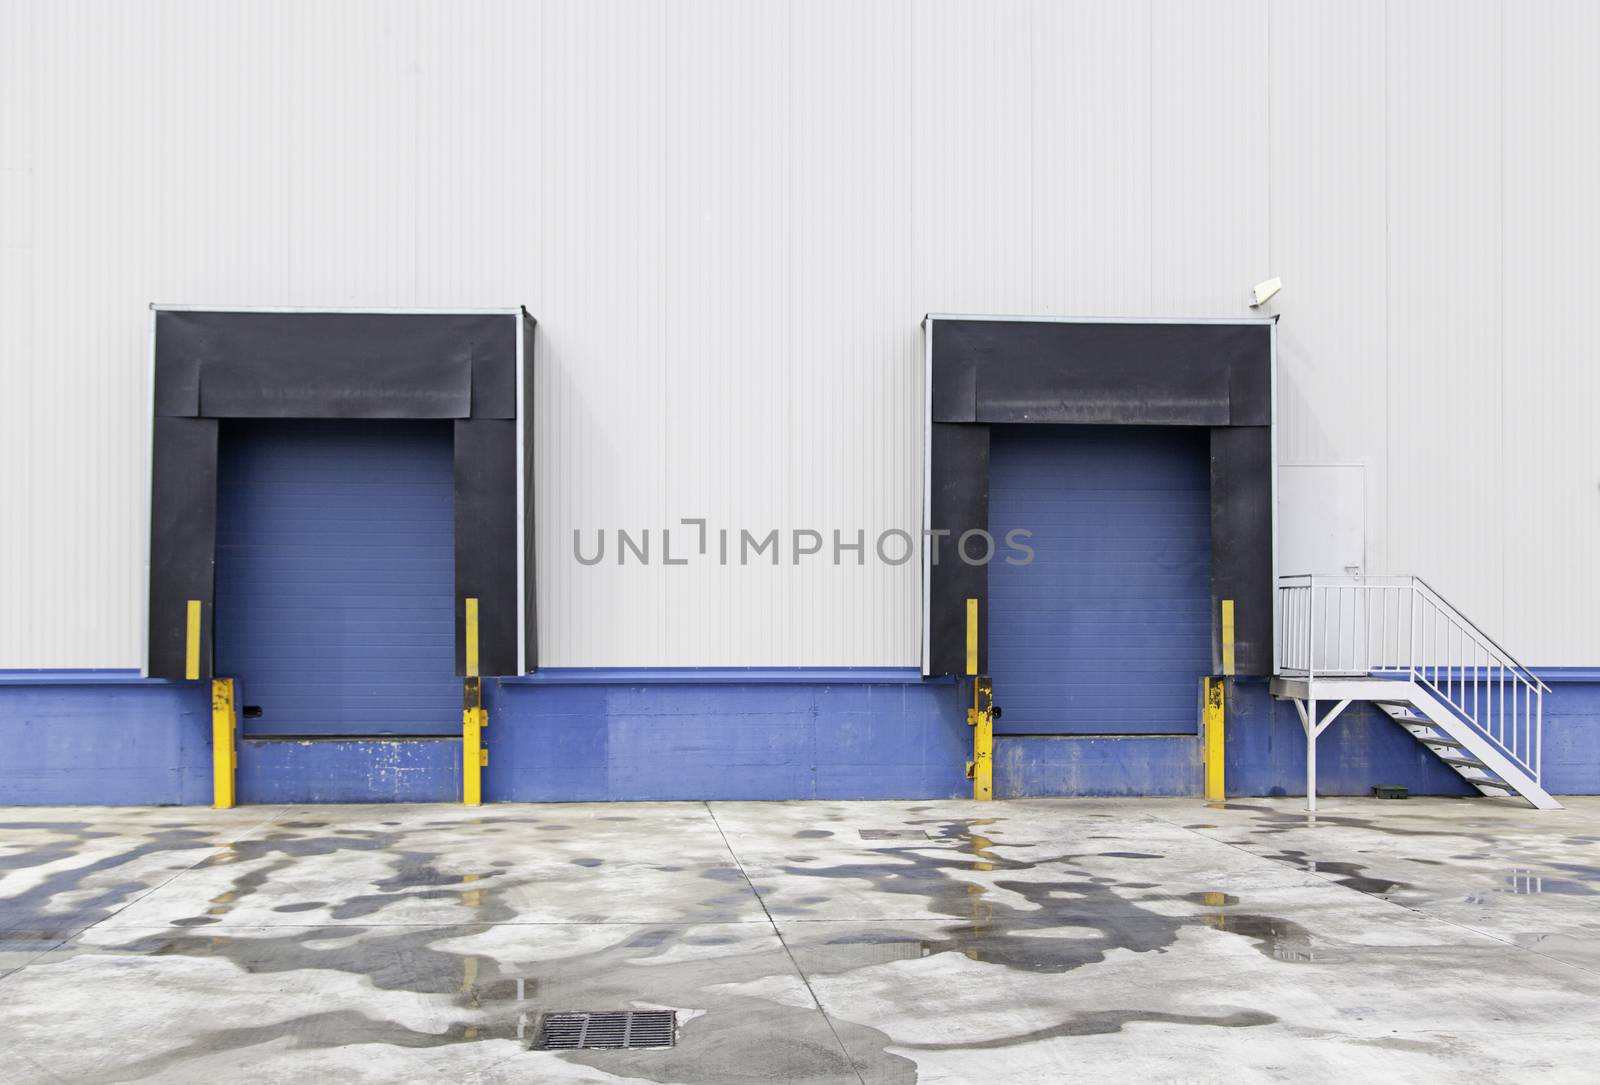 New loading dock, trucking industry detailed background with industrial detail